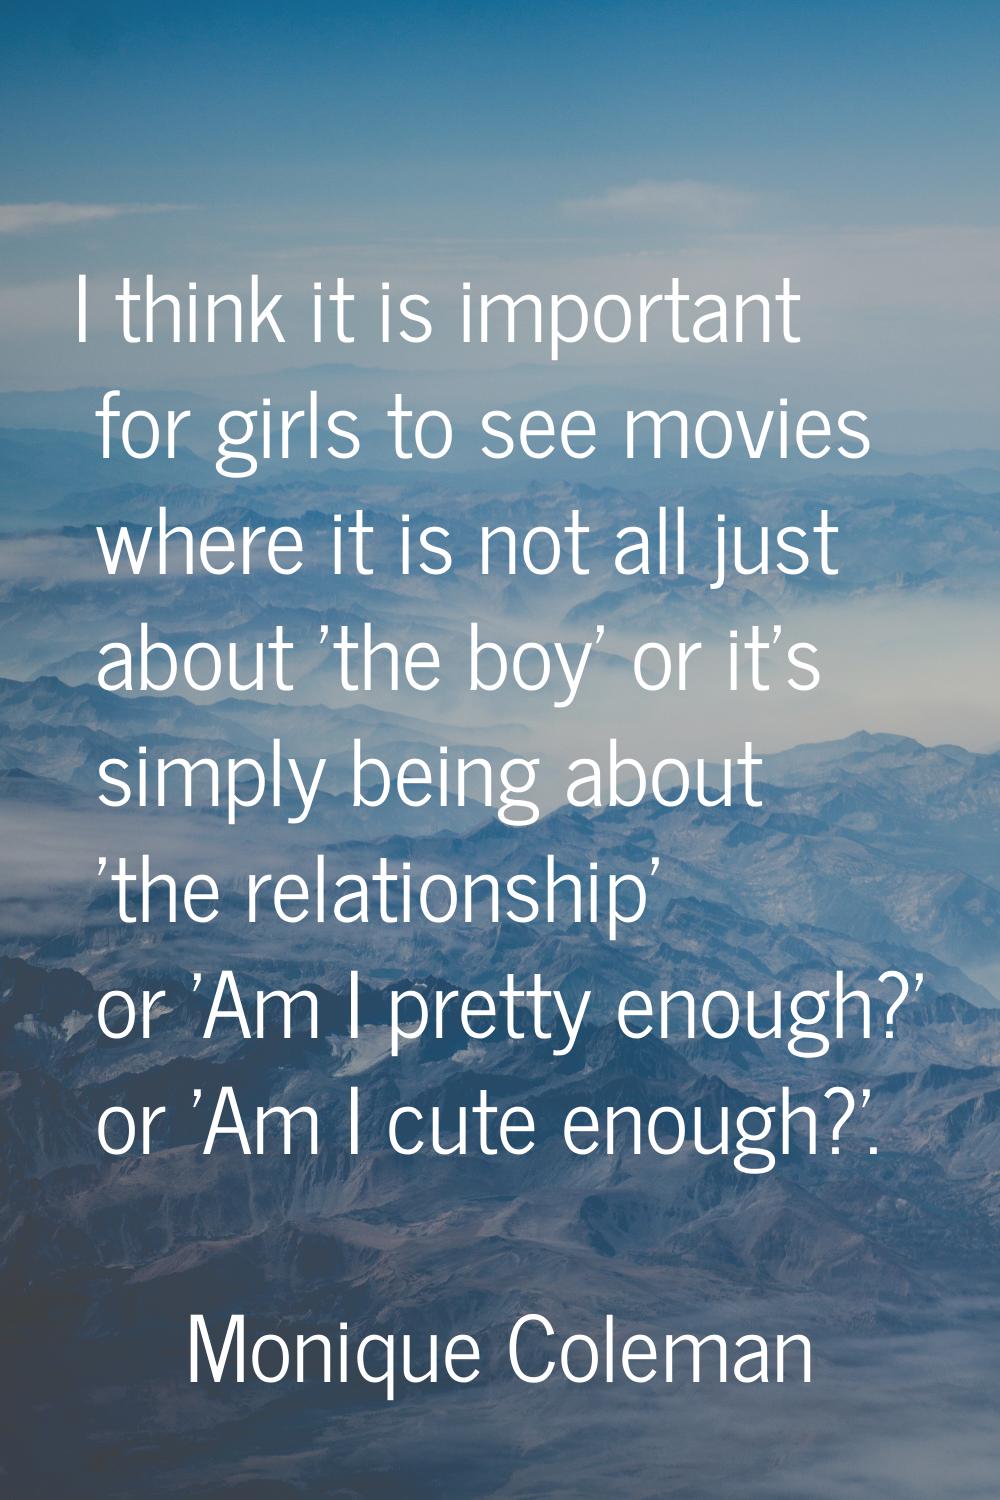 I think it is important for girls to see movies where it is not all just about 'the boy' or it's si